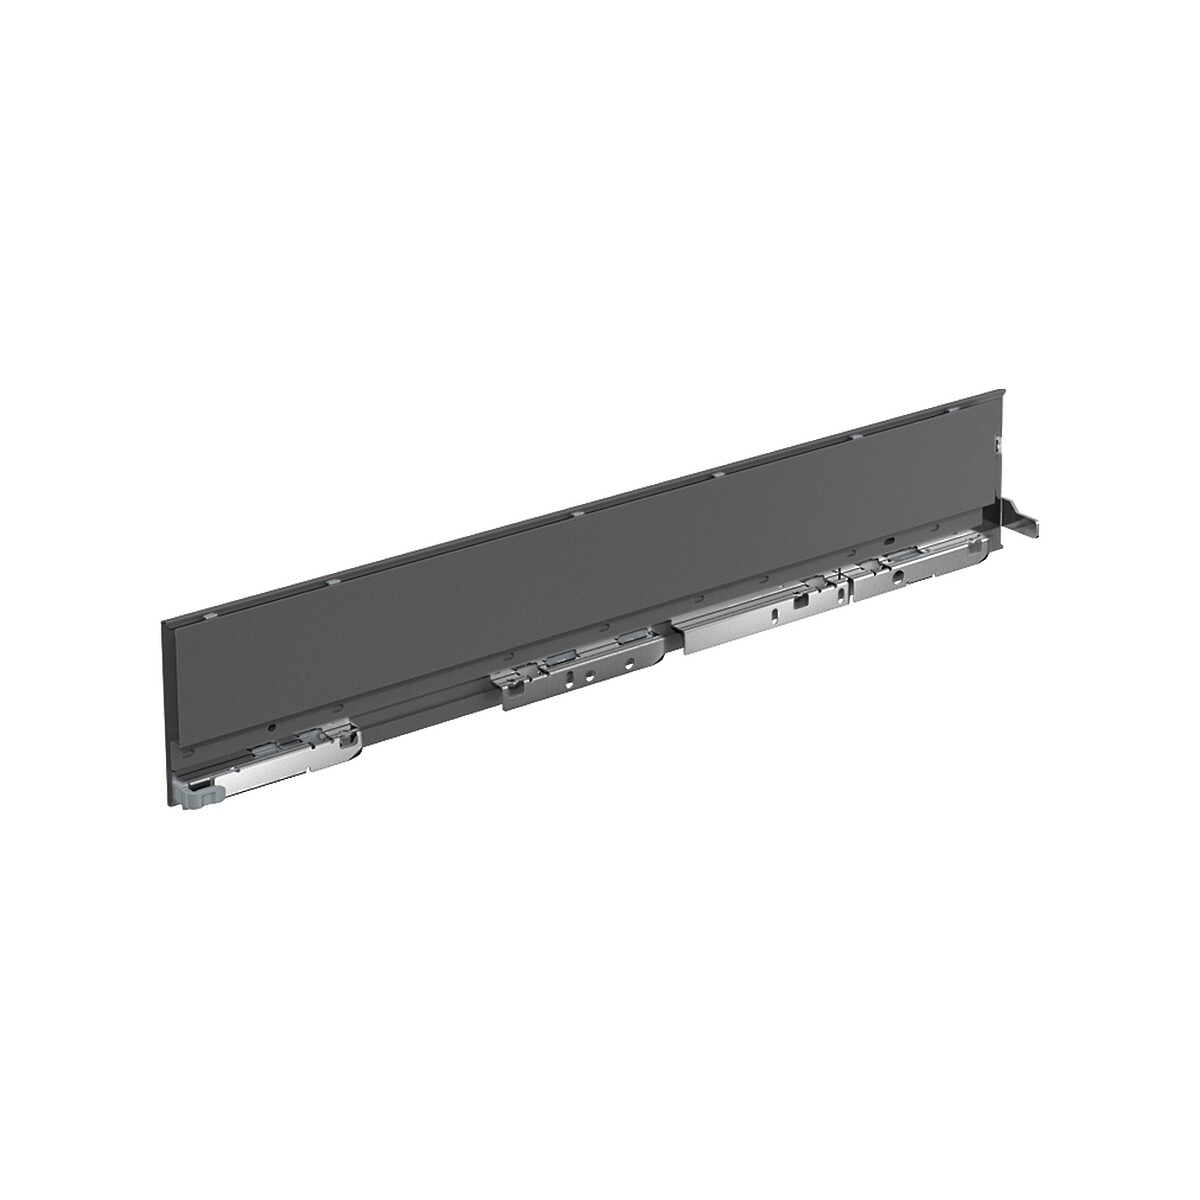 AvanTech YOU Drawer side profile, height 101 mm x NL 270 mm, Anthracite, Right